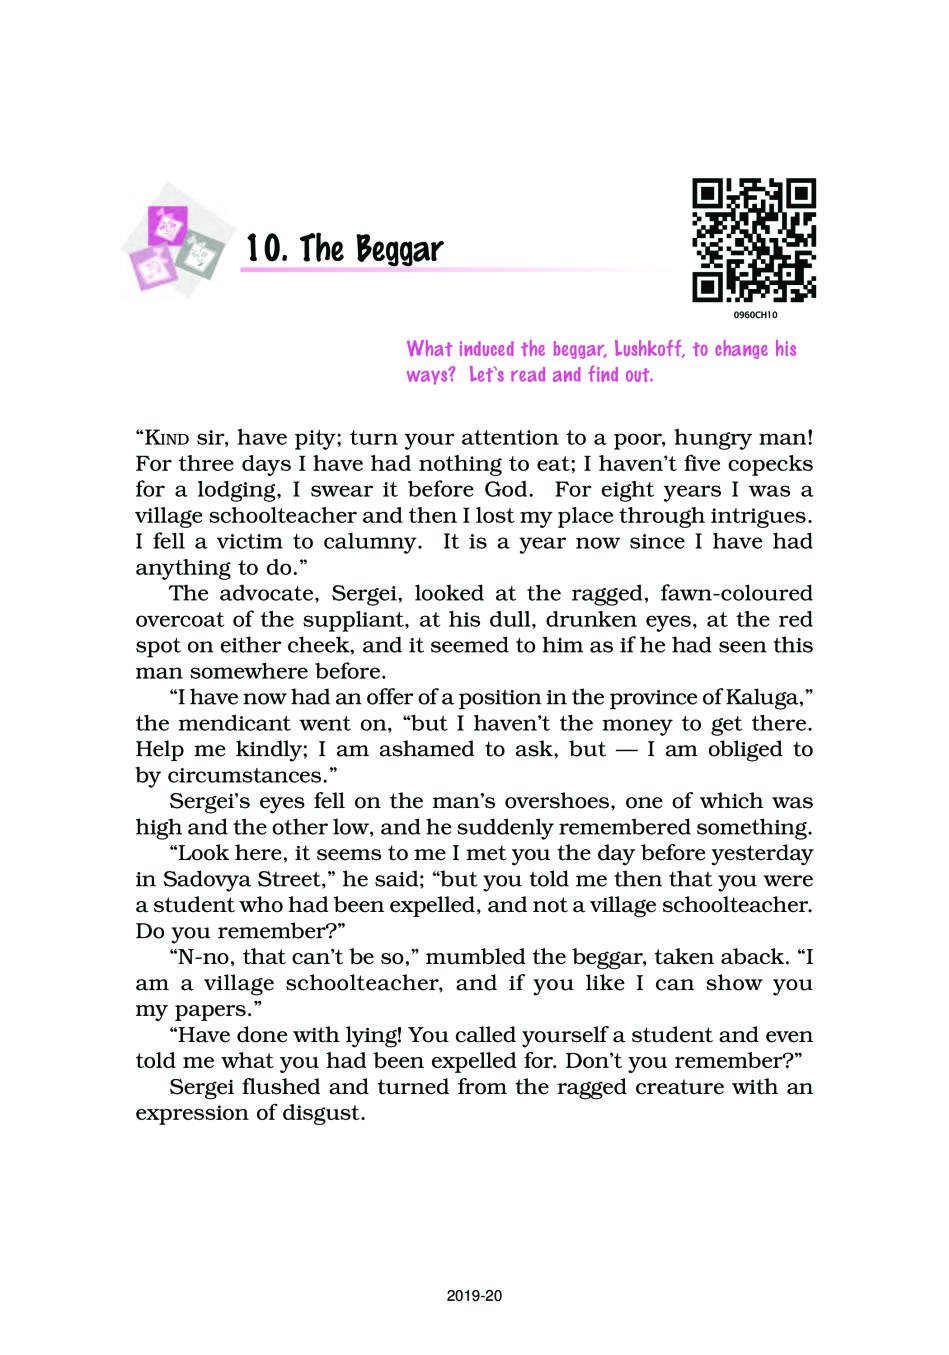 NCERT Book Class 9 English (Moments) Chapter 10 The Beggar - Page 1